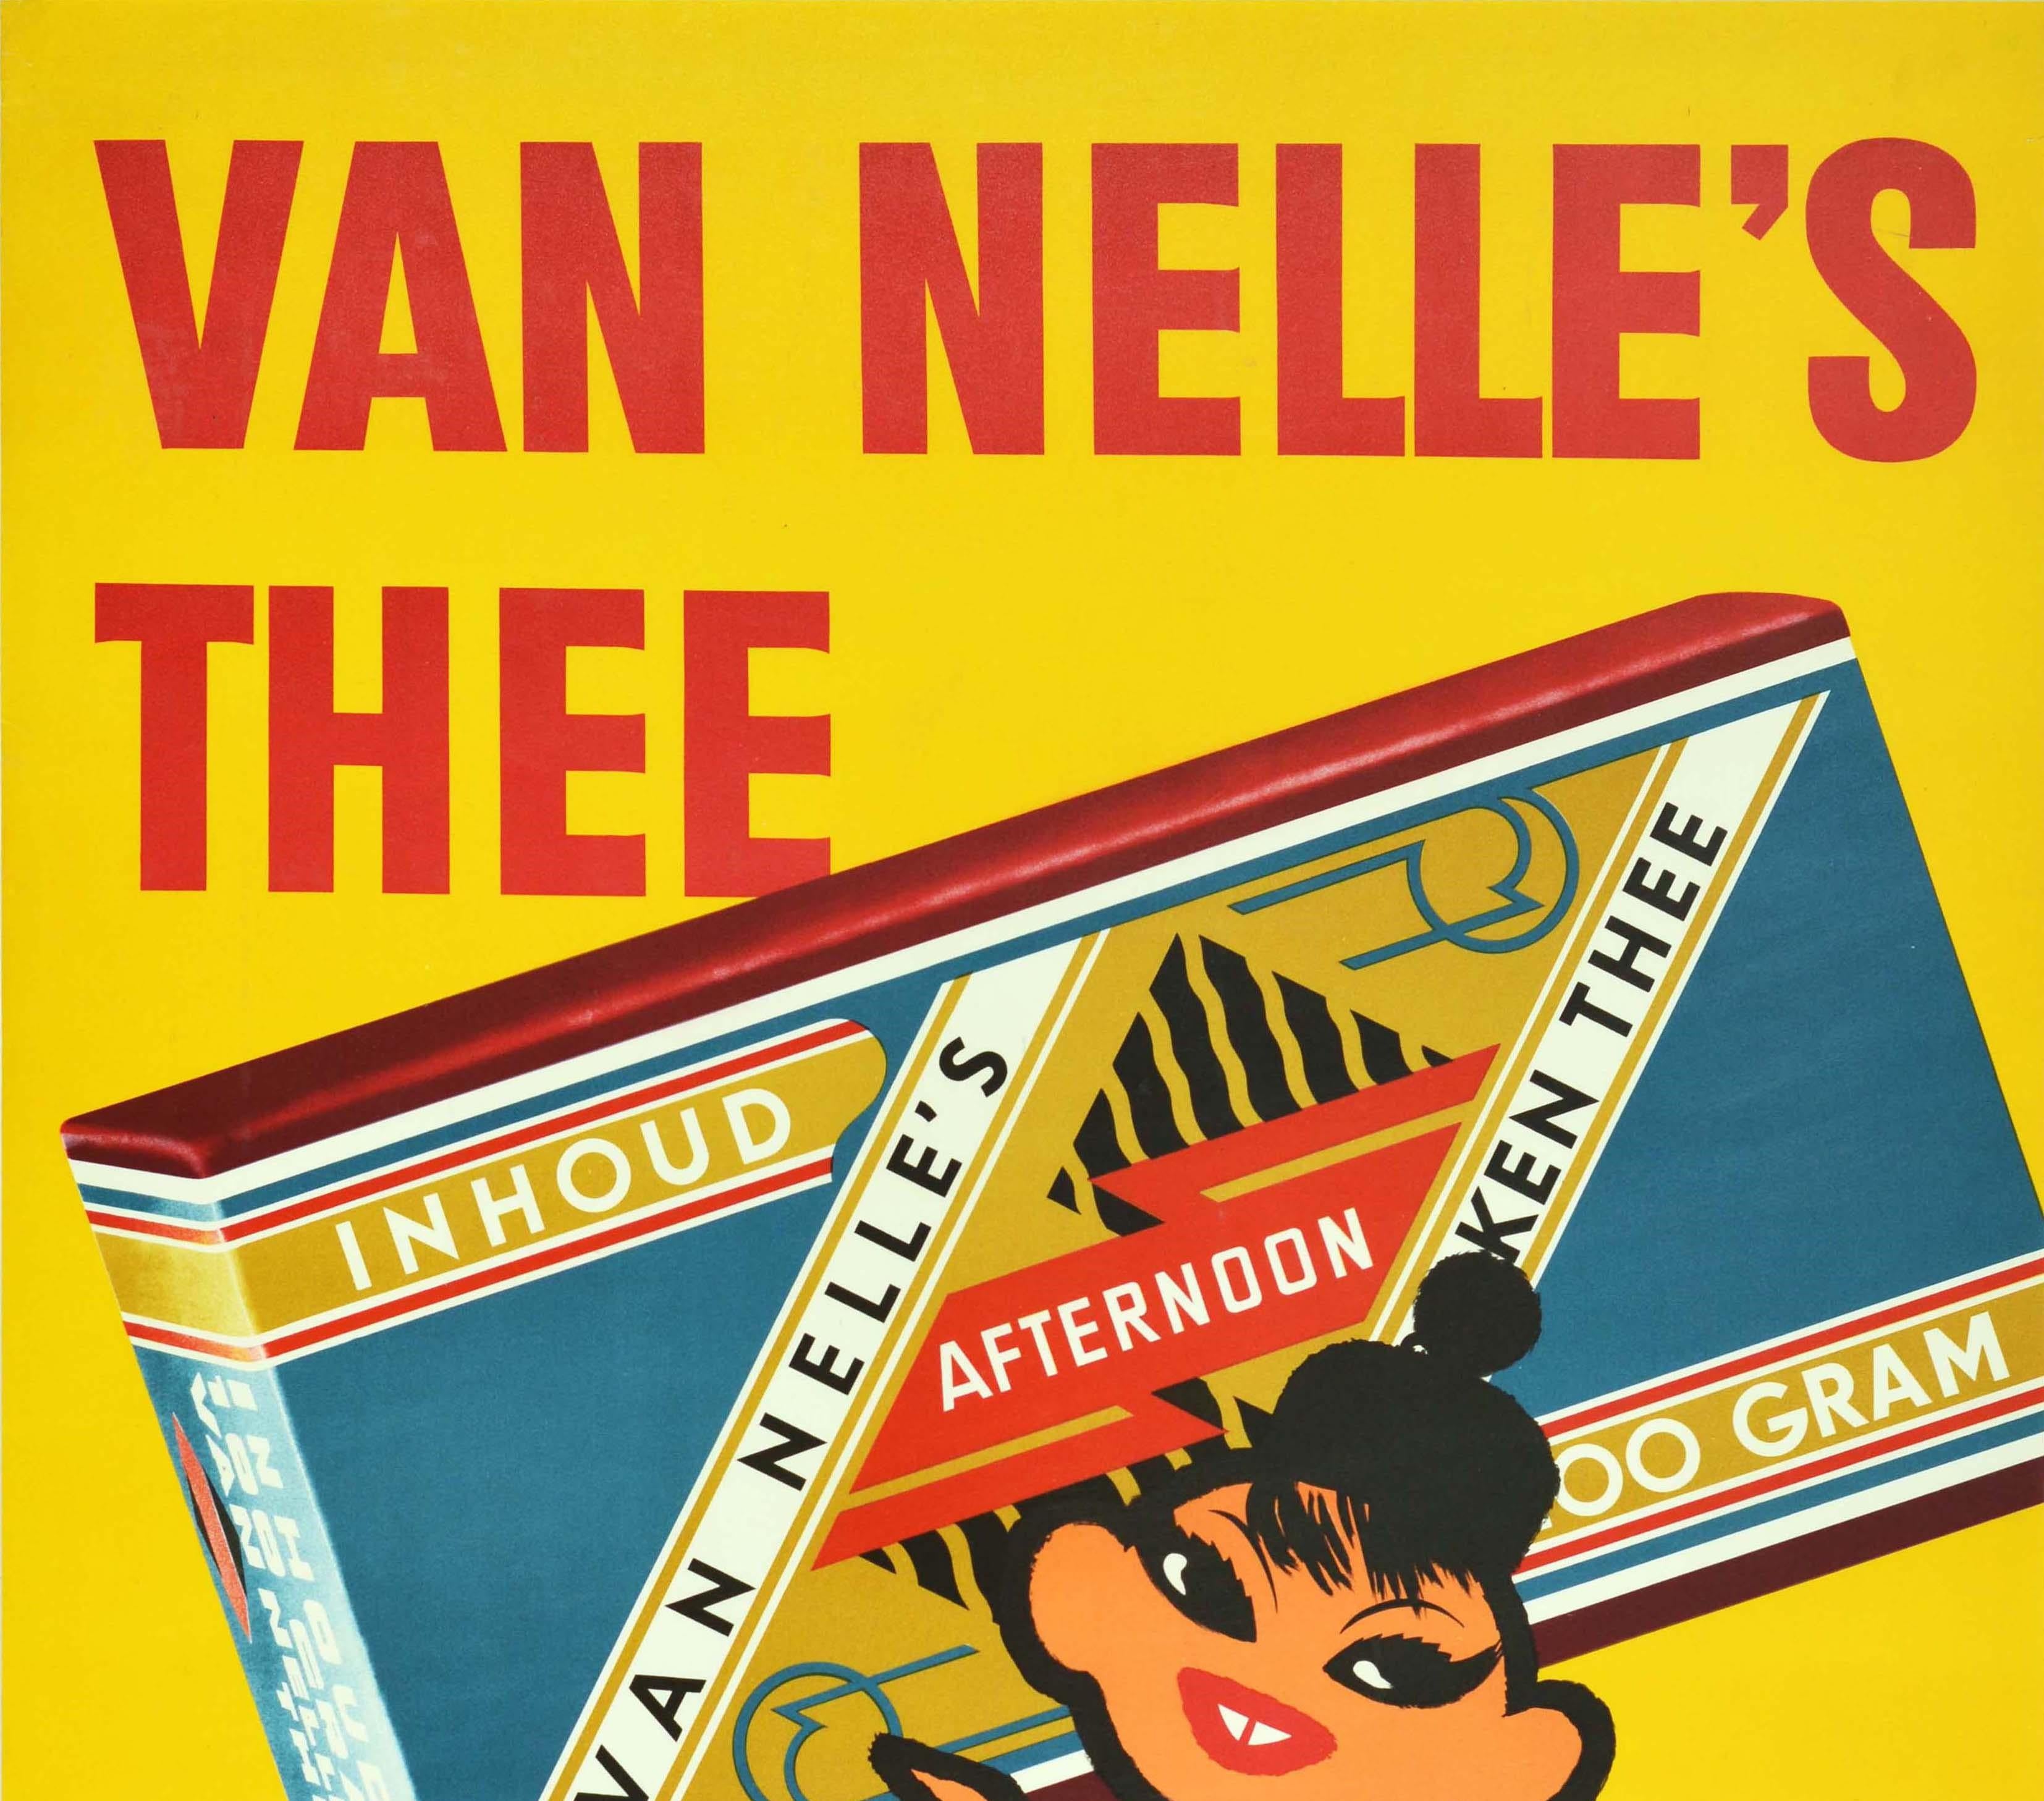 Original vintage drink advertising poster for Van Nelle's Thee Van Nelle Kwaliteit / Van Nelle's Tea Van Nelle Quality featuring a bright and colourful illustration of a smiling Asian lady wearing a Mandarin style hat on top of her her long hair in